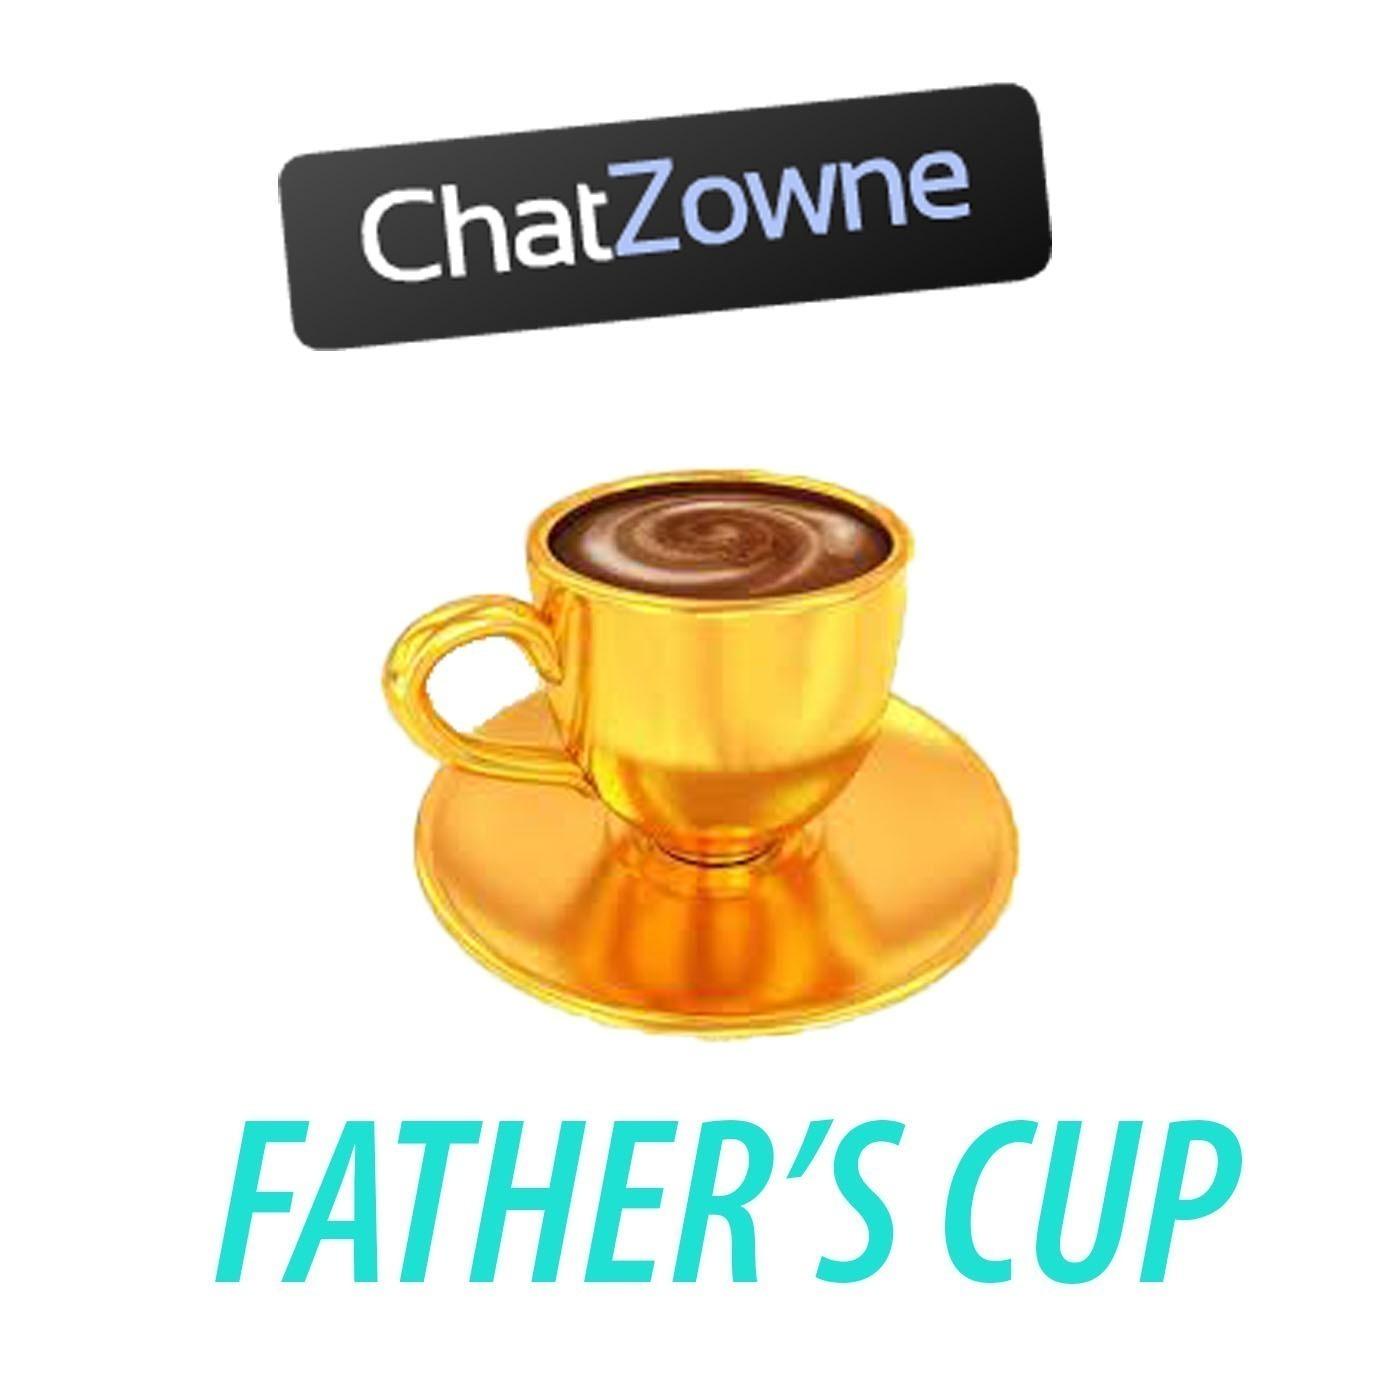 FATHER'S CUP